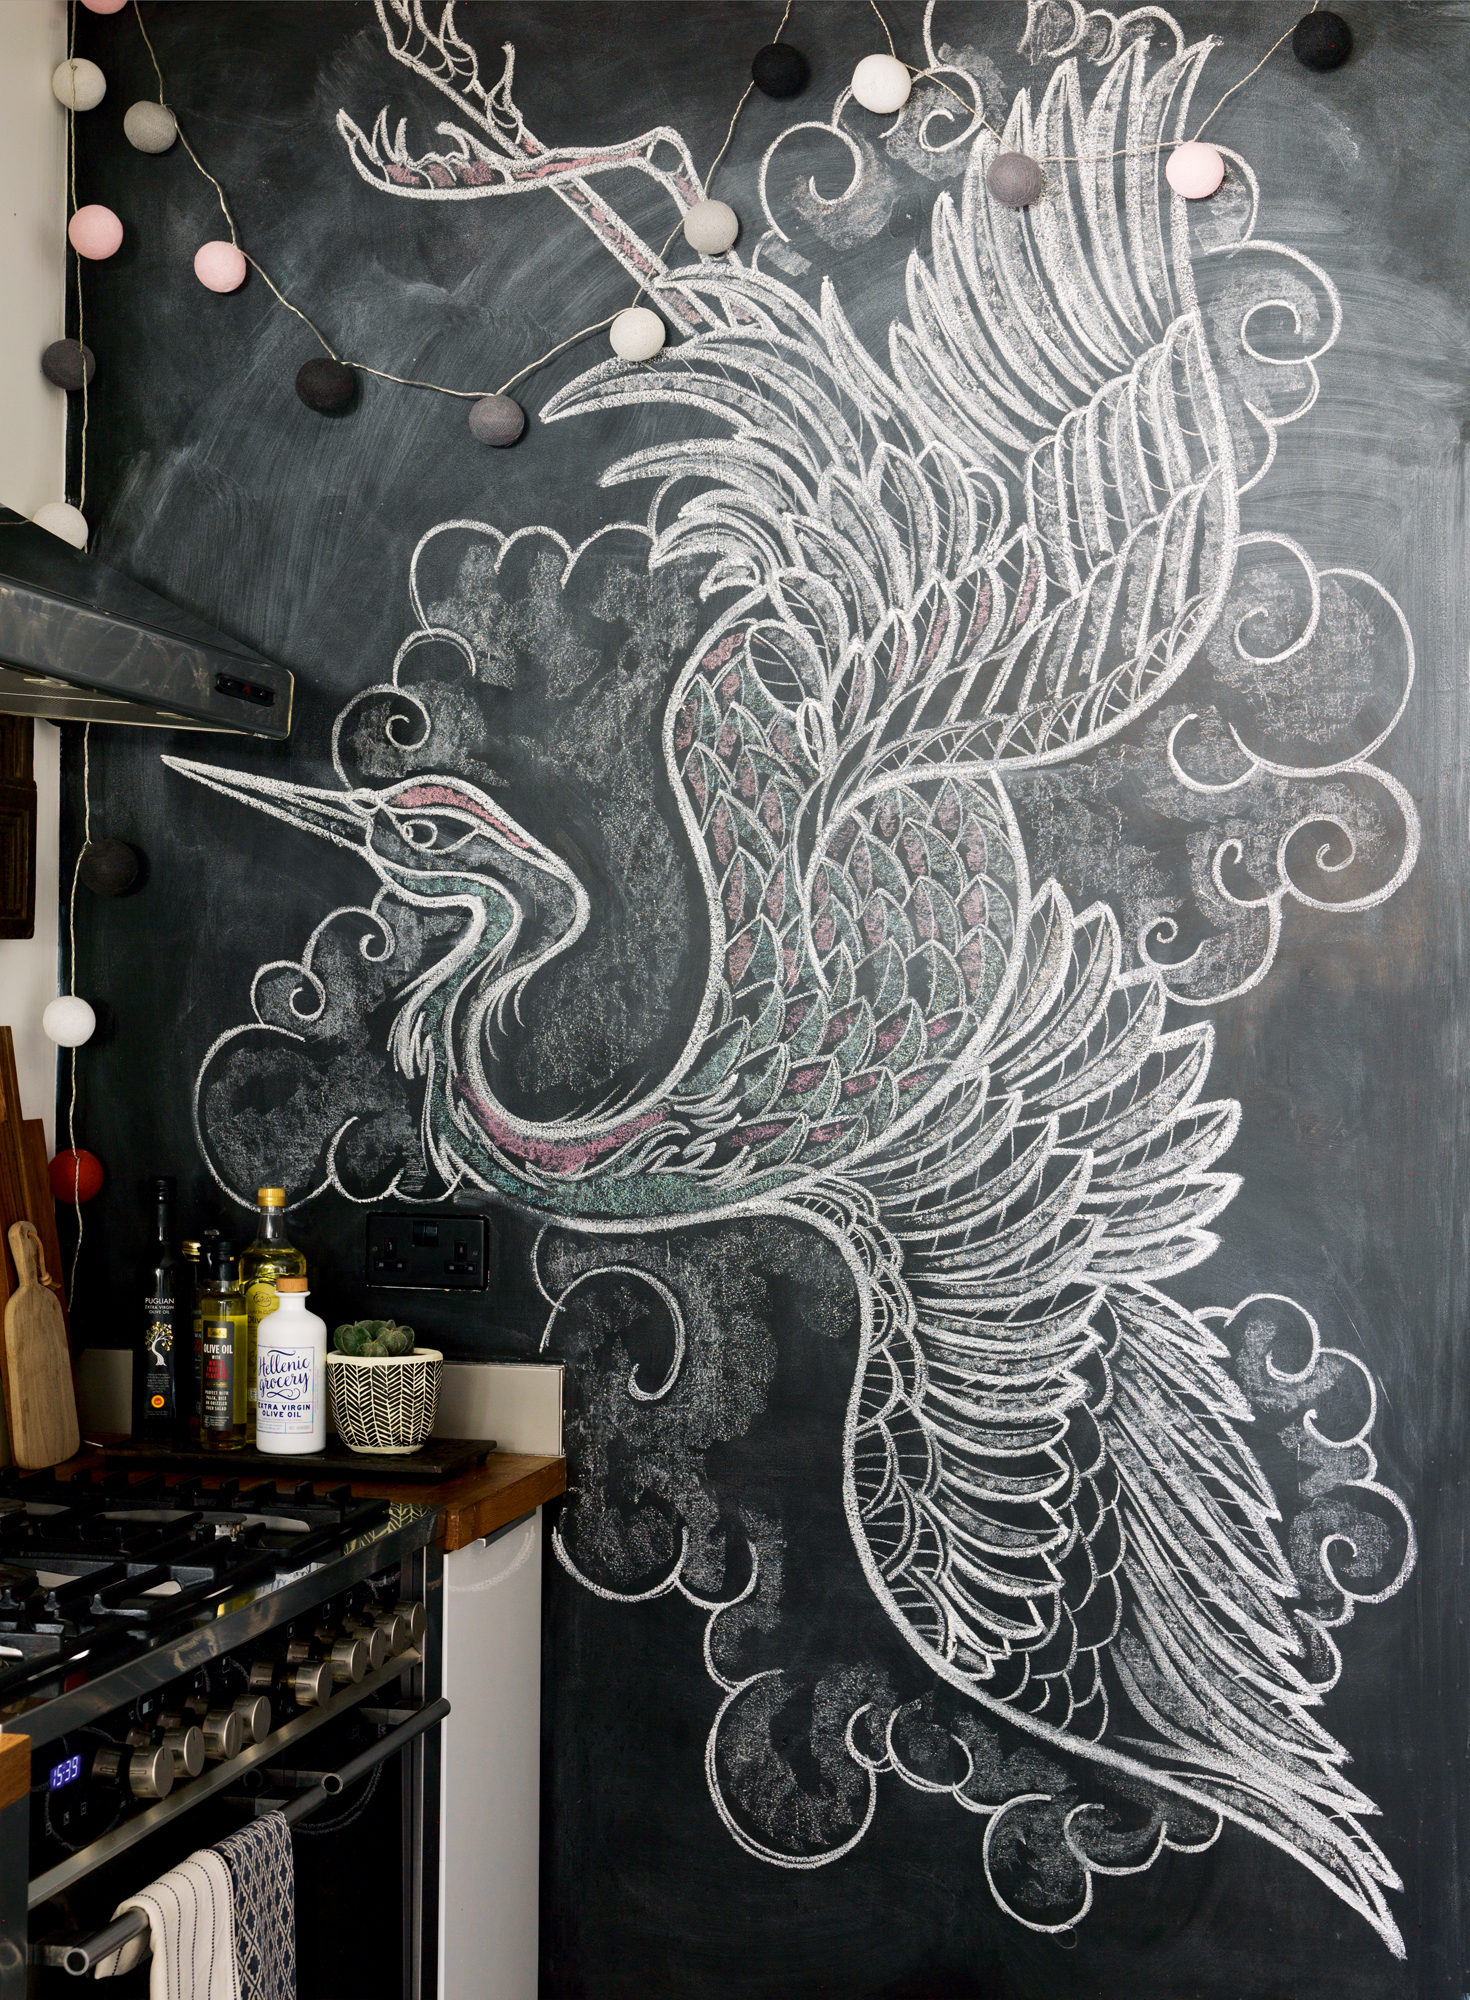 Tips & Advice Blog - How to use Chalkboard Paint